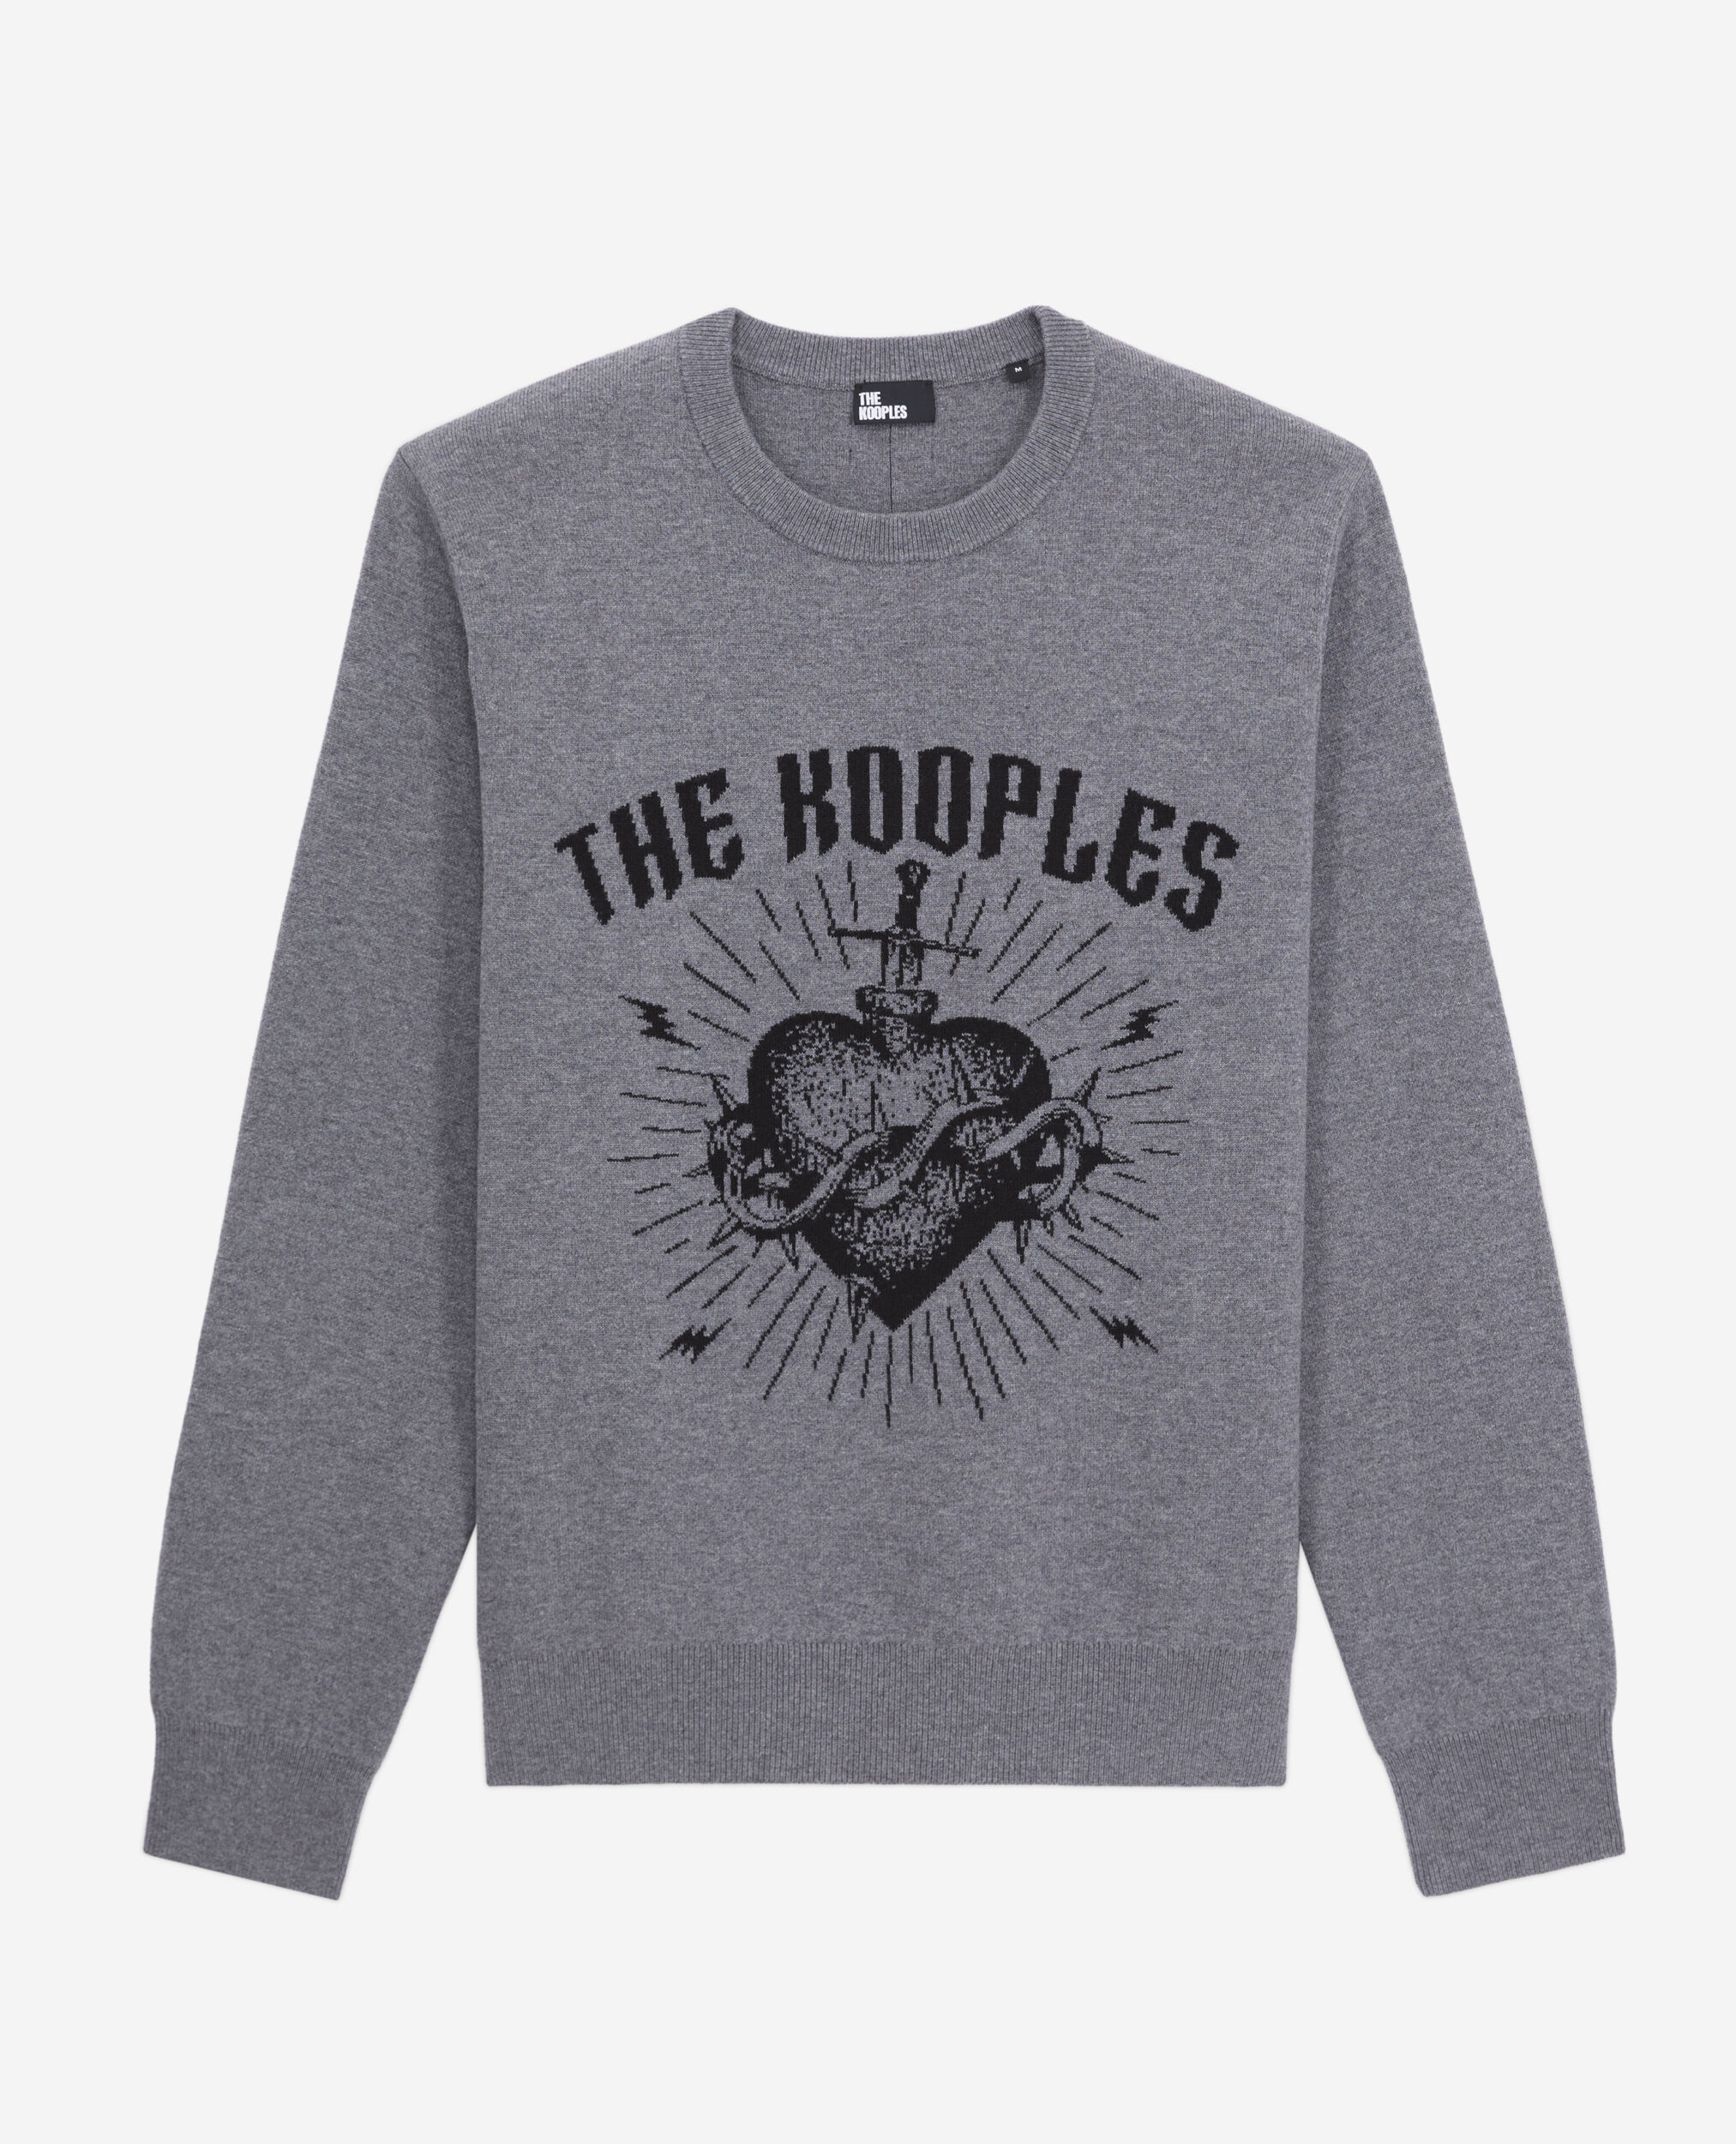 Dagger through heart grey sweater in wool blend, ANTHRACITE / BLACK, hi-res image number null